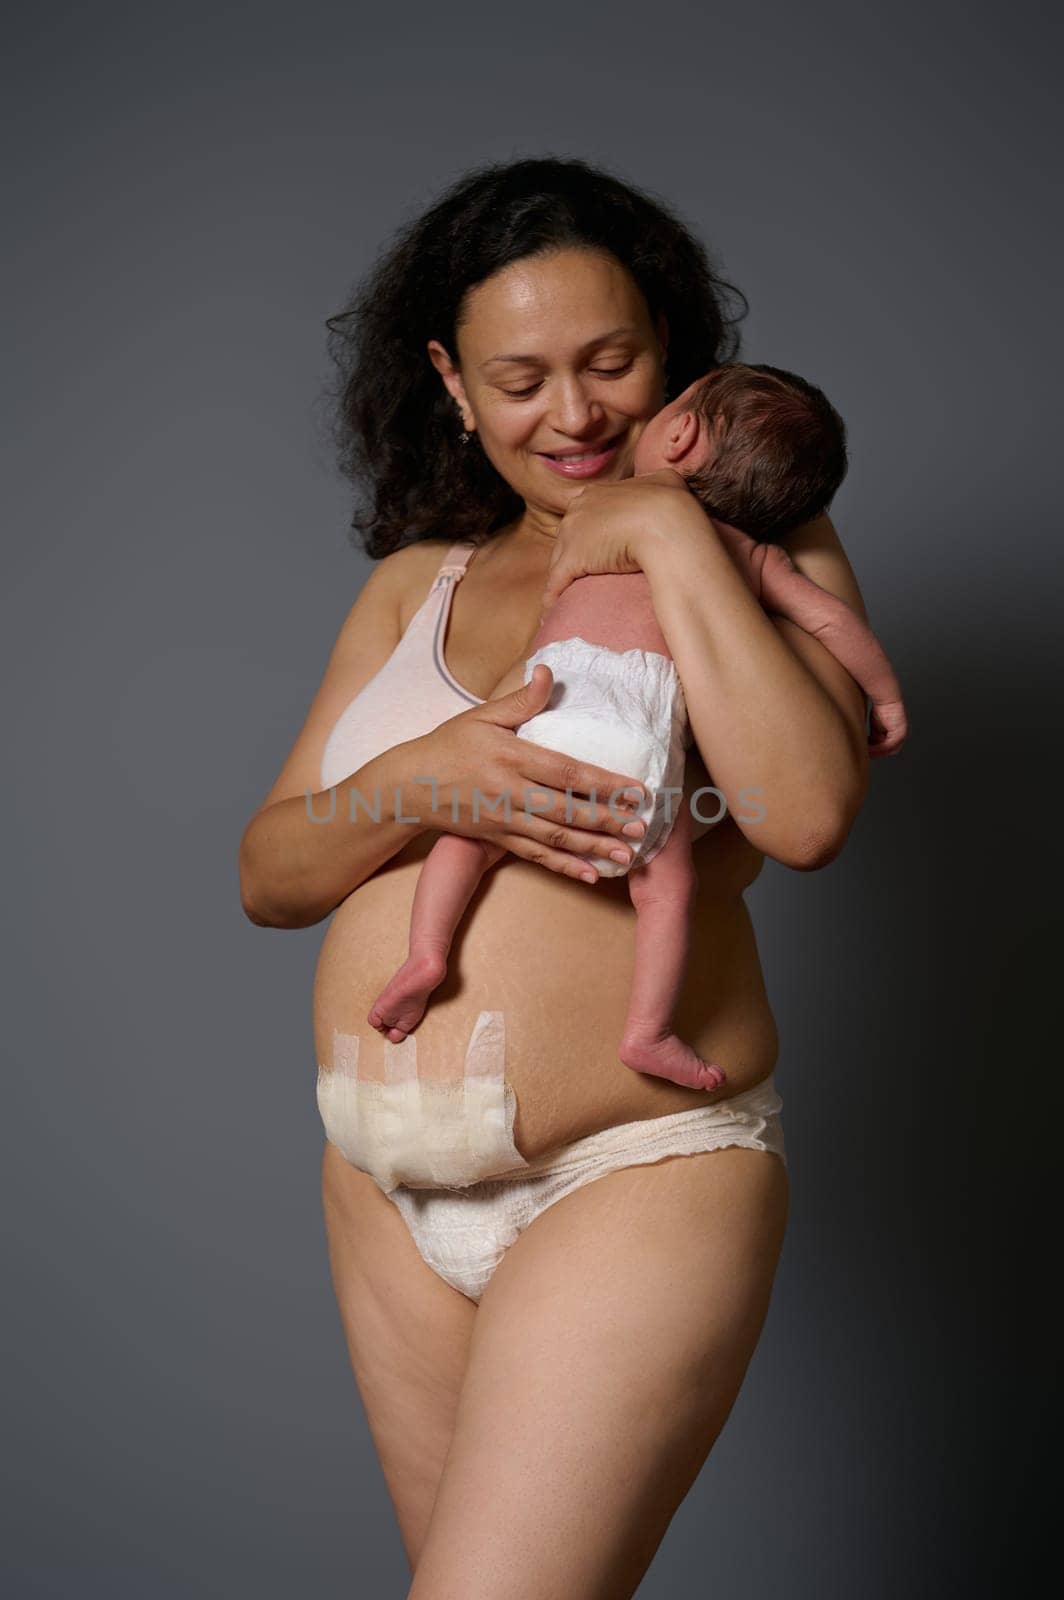 Happy mother in lingerie, showing naked belly with bandage hiding scars after c-section cesarean and postpartum stretch marks, smiling while holding her newborn baby, isolated gray studio background